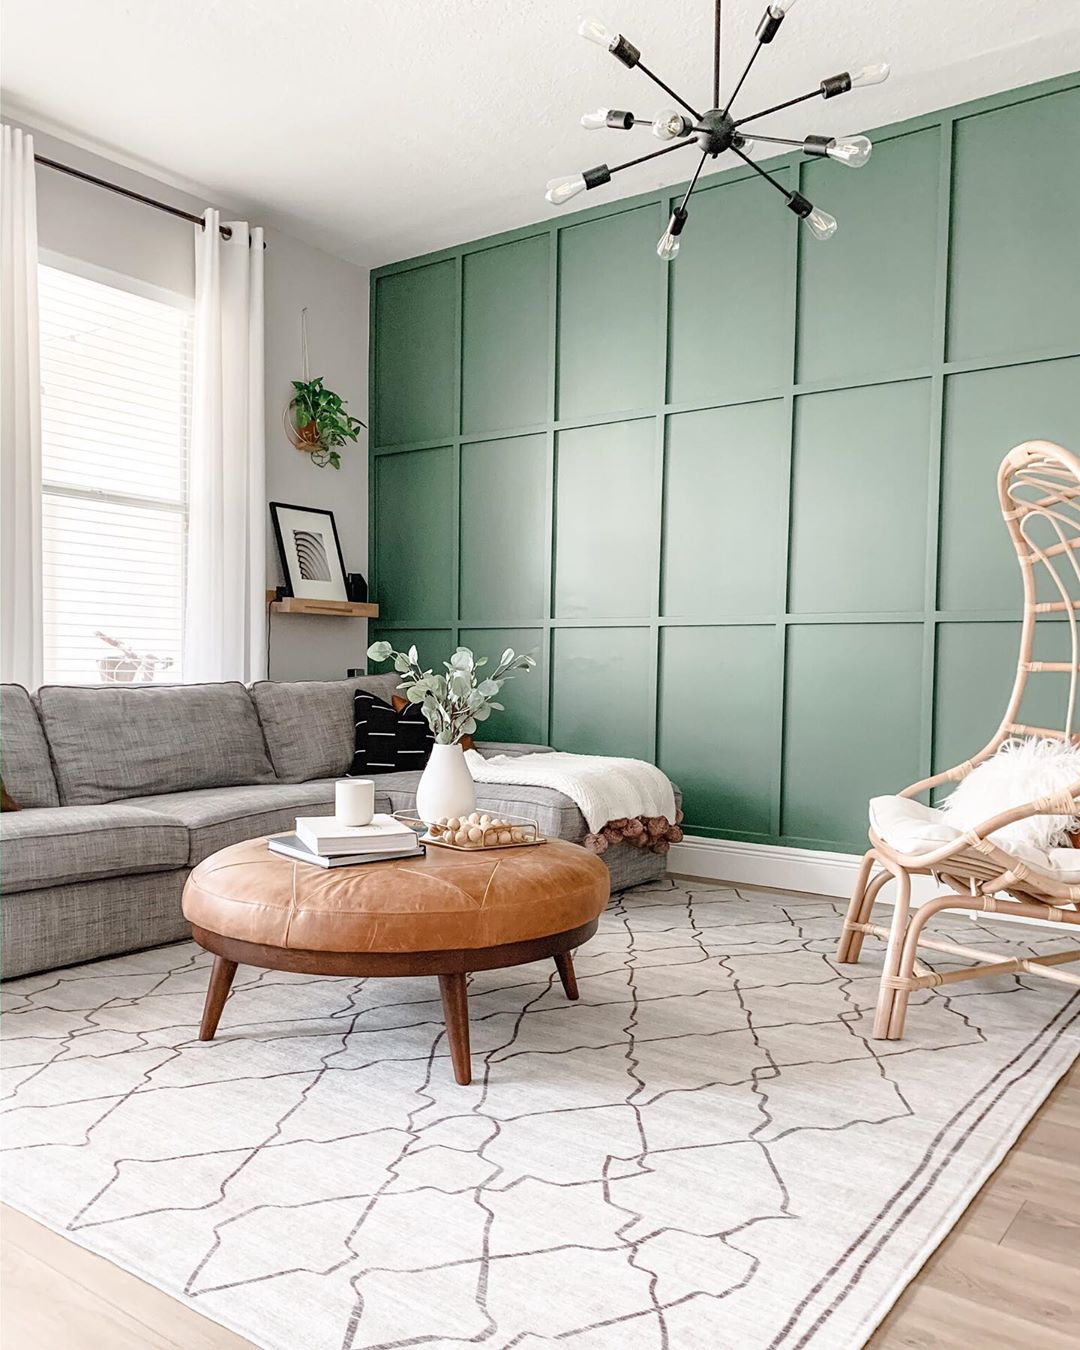 board and batten wall with green paint and modern furniture in the room photo by Instagram user @xomyhome